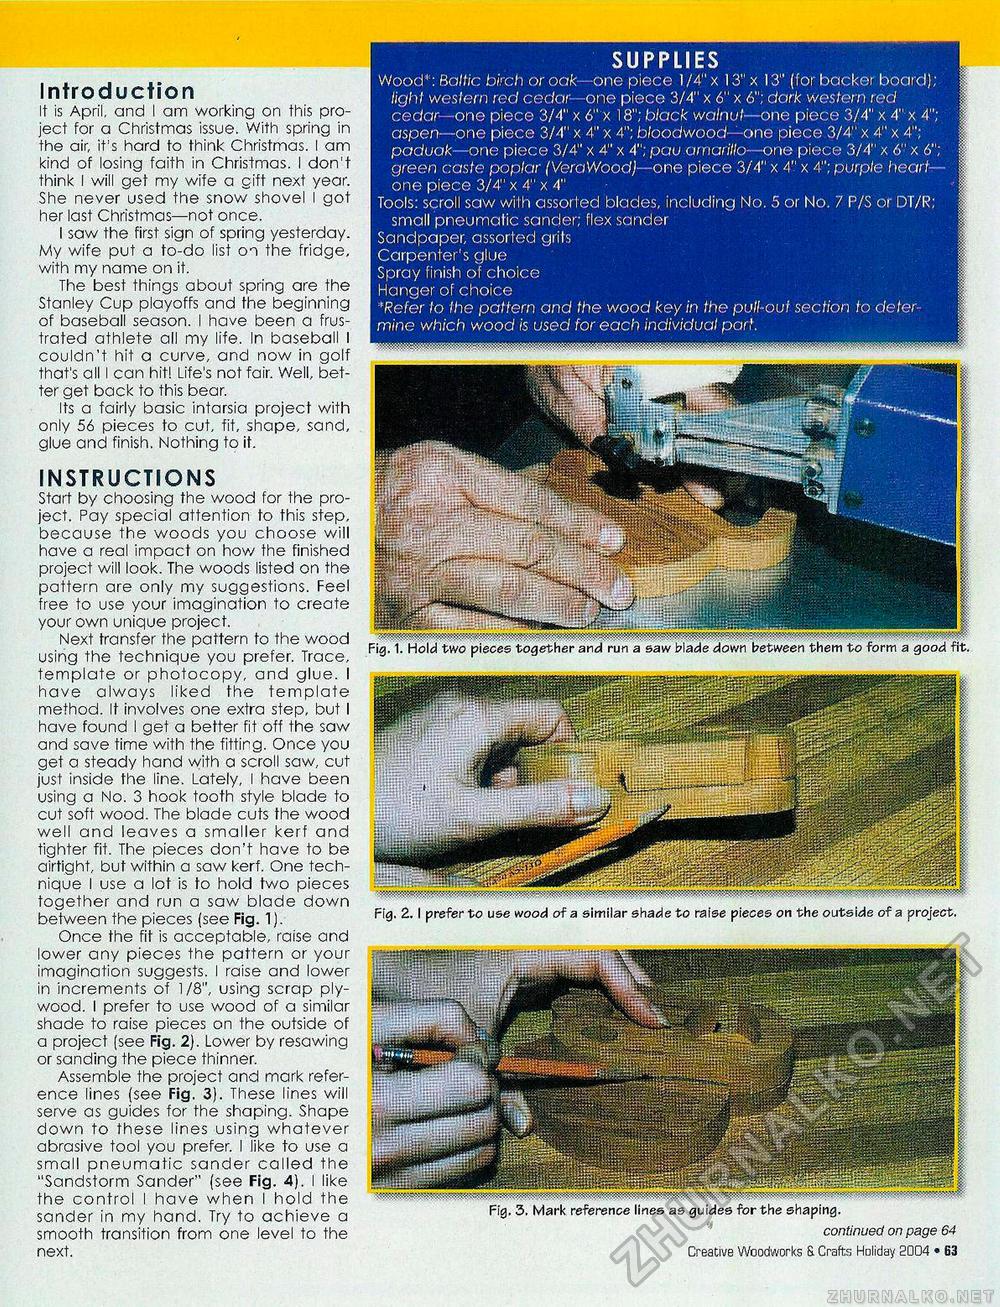 Creative Woodworks  & crafts-103-2004-Holiday,  63